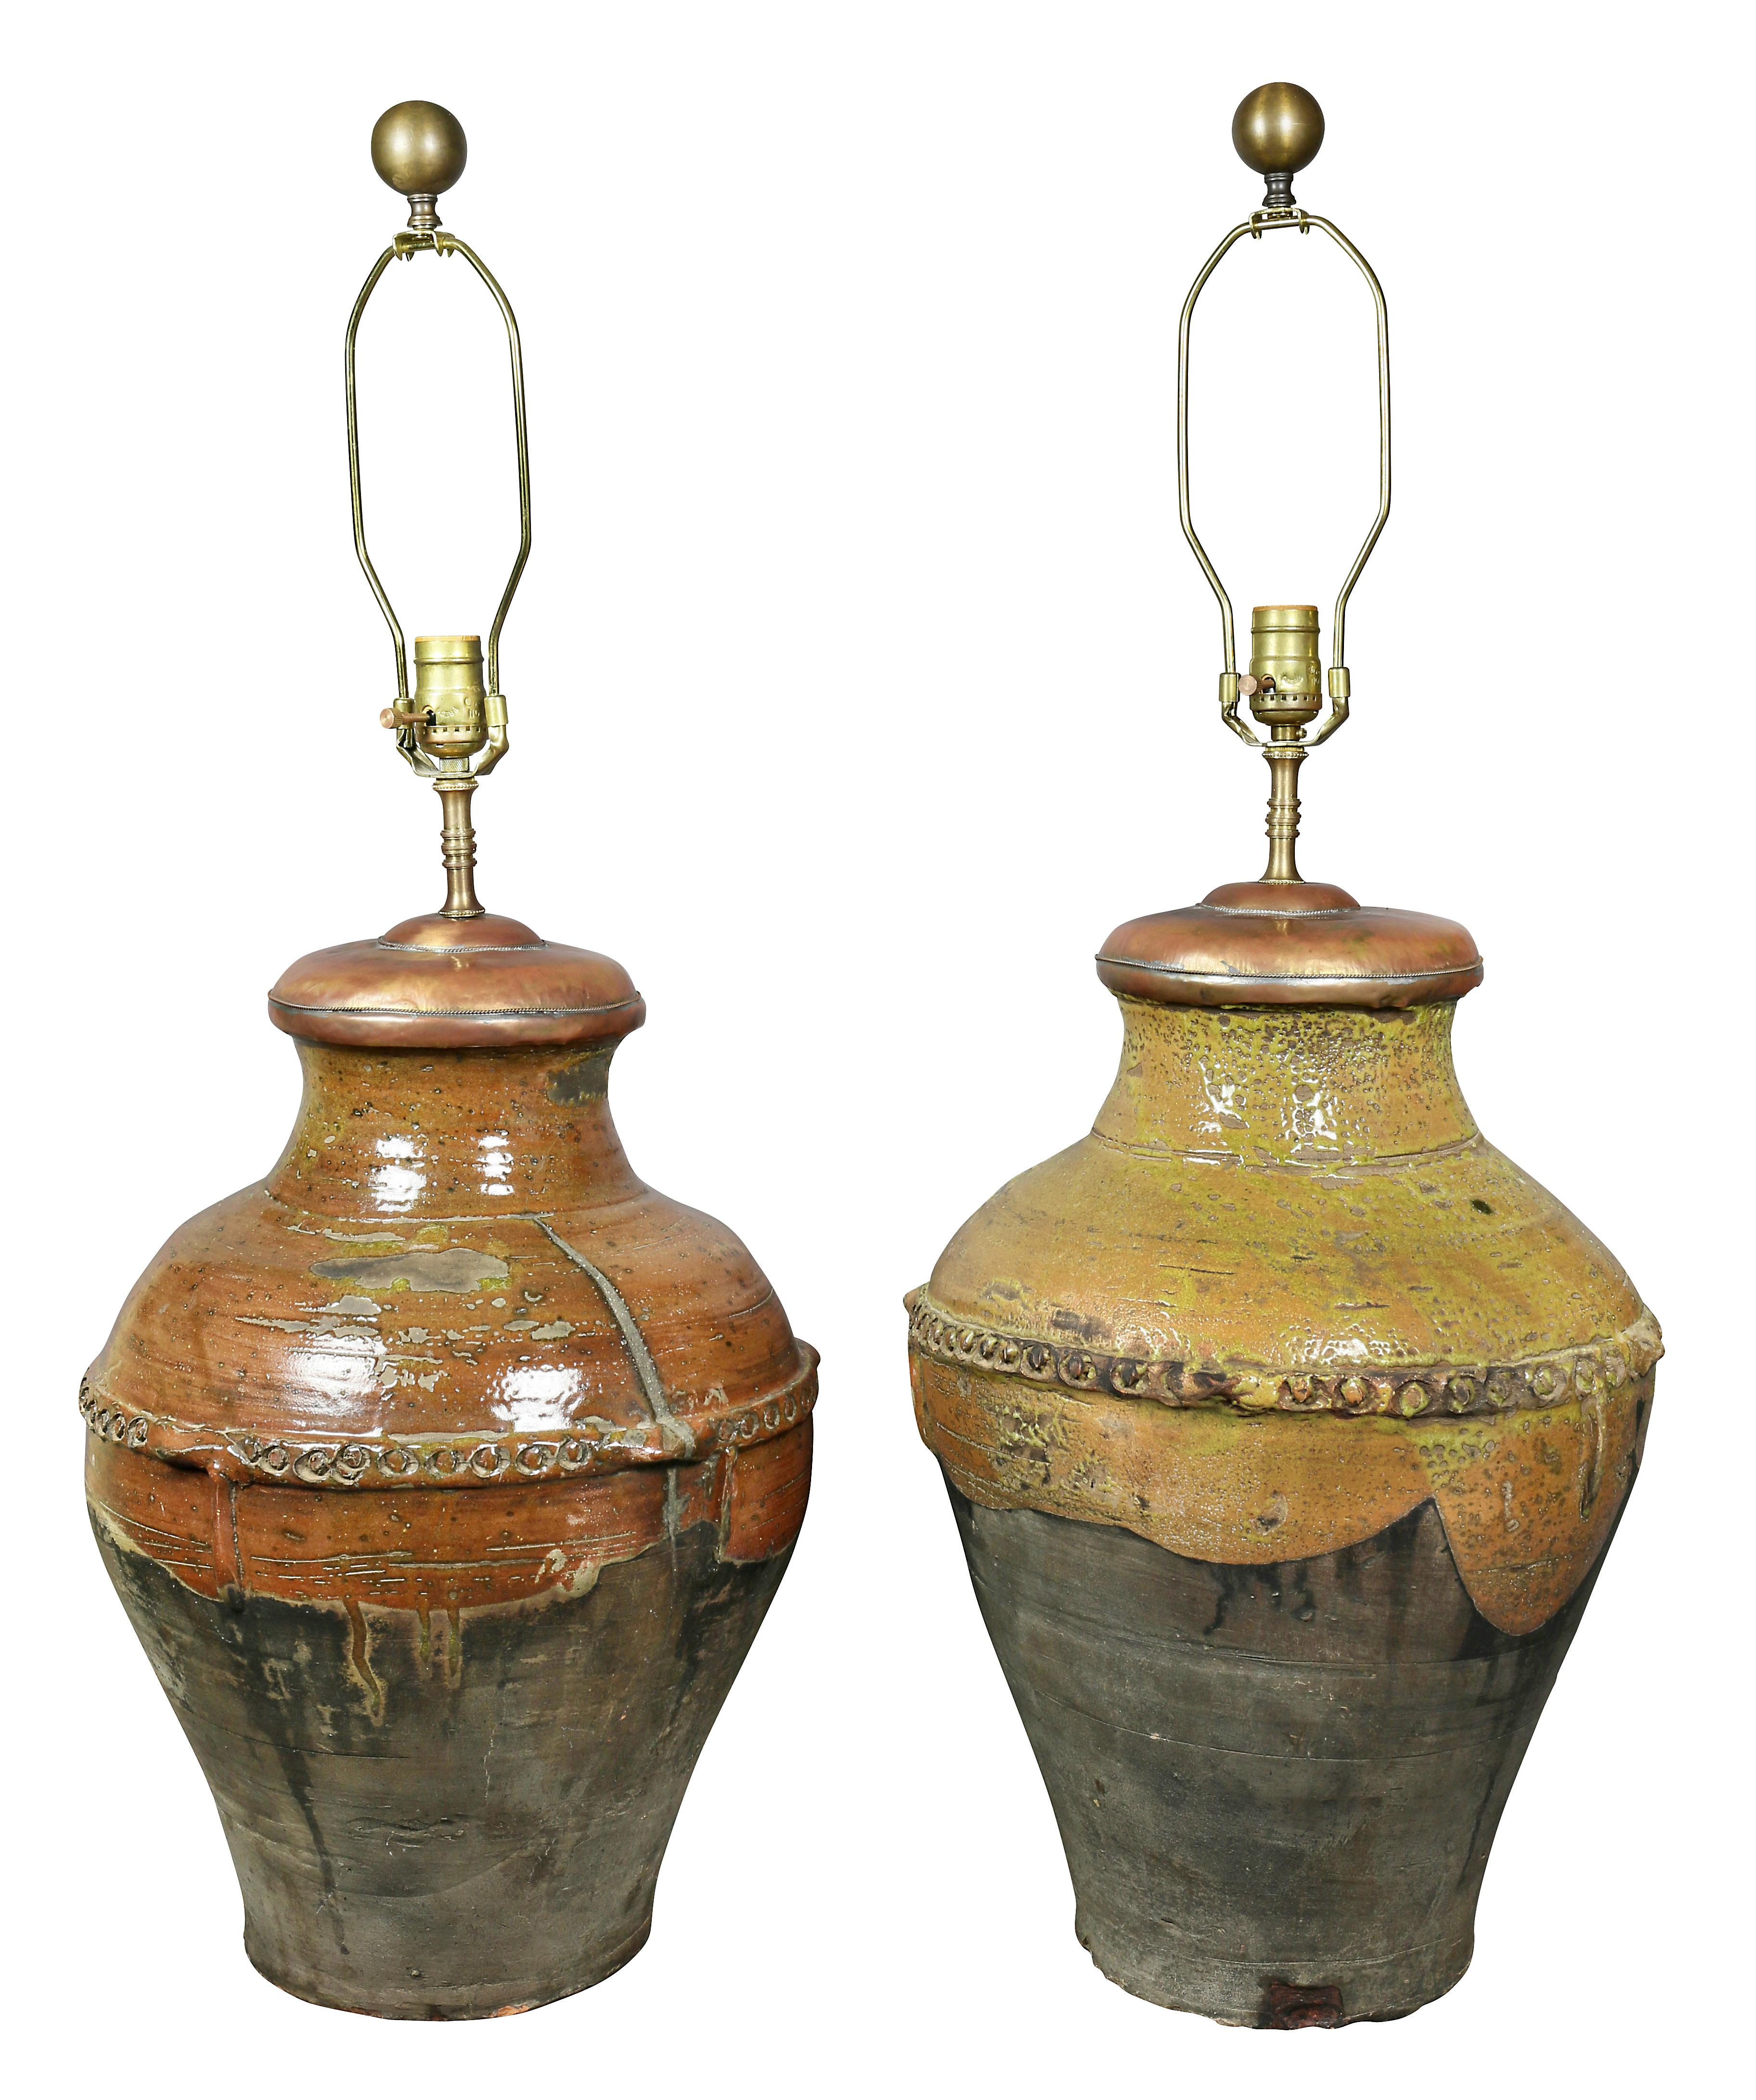 Each with a single socket with copper cover for jar lid, baluster form partially glazed with applied decoration, includes shades.
Provenance: Michael D Dingman.
 